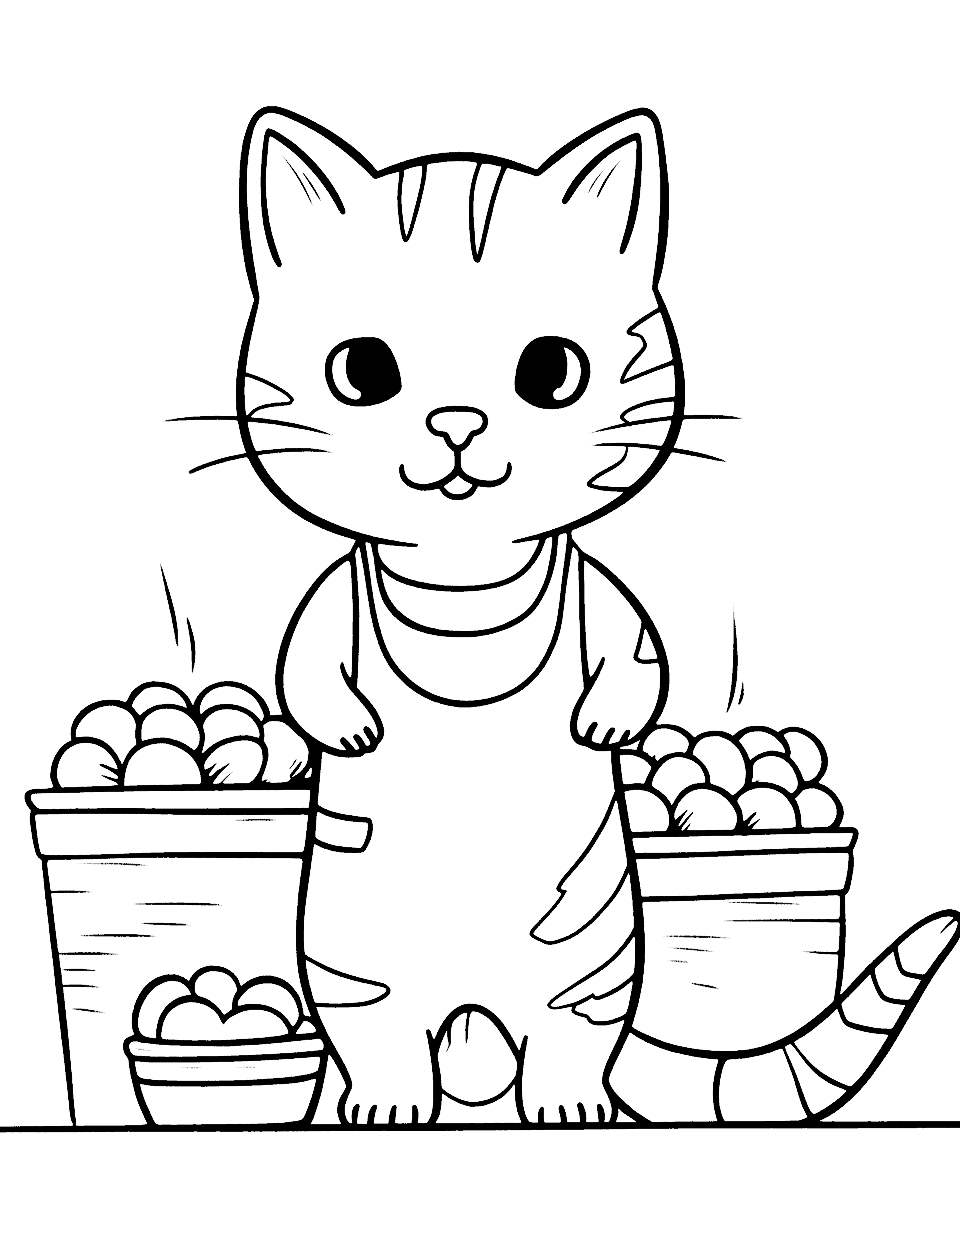 Cat Selling Ice Cream Cones Coloring Page - A charming cat in an apron selling an array of colorful ice cream cones.